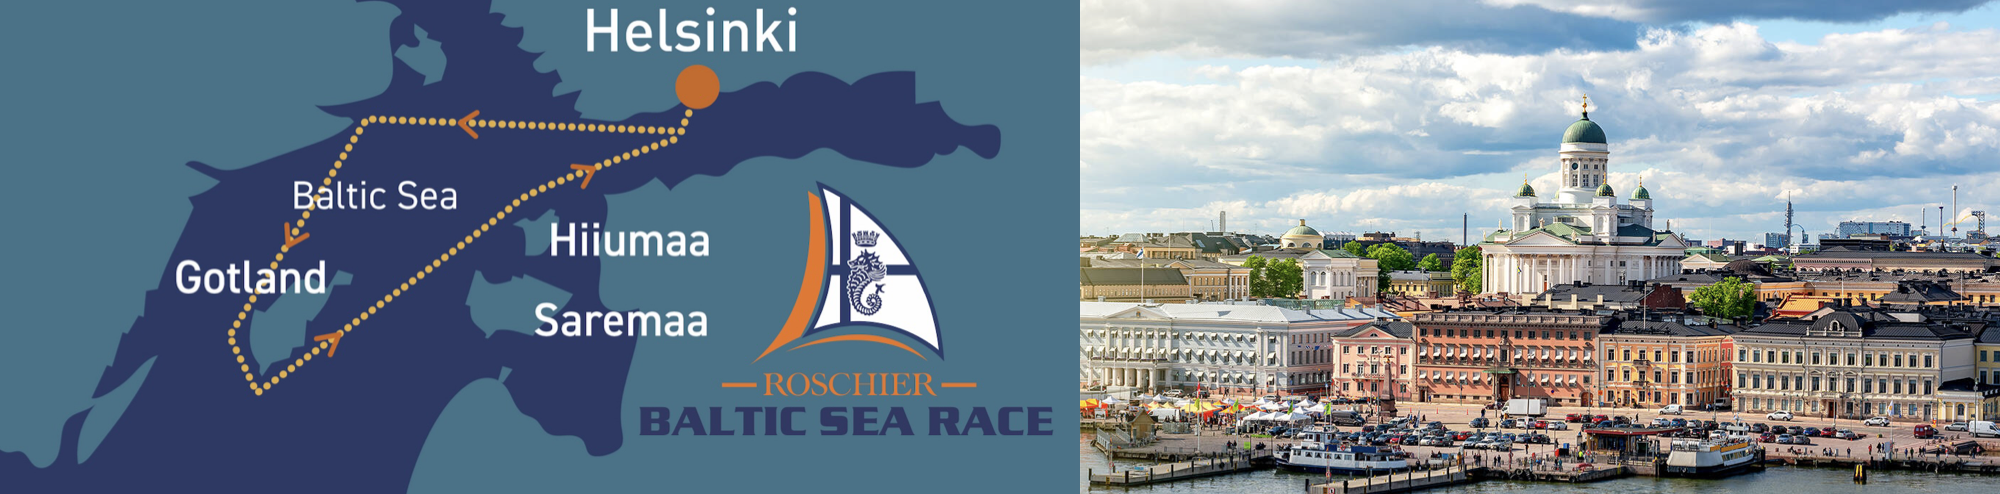 The second edition of the Roschier Baltic Sea Race will start from Helsinki, Finland on 27th July 2024. This new 635nm offshore race is attracting a diverse range of boats eager to take on a new challenge, racing to win The Baltic Trophy for the best corrected time under IRC.